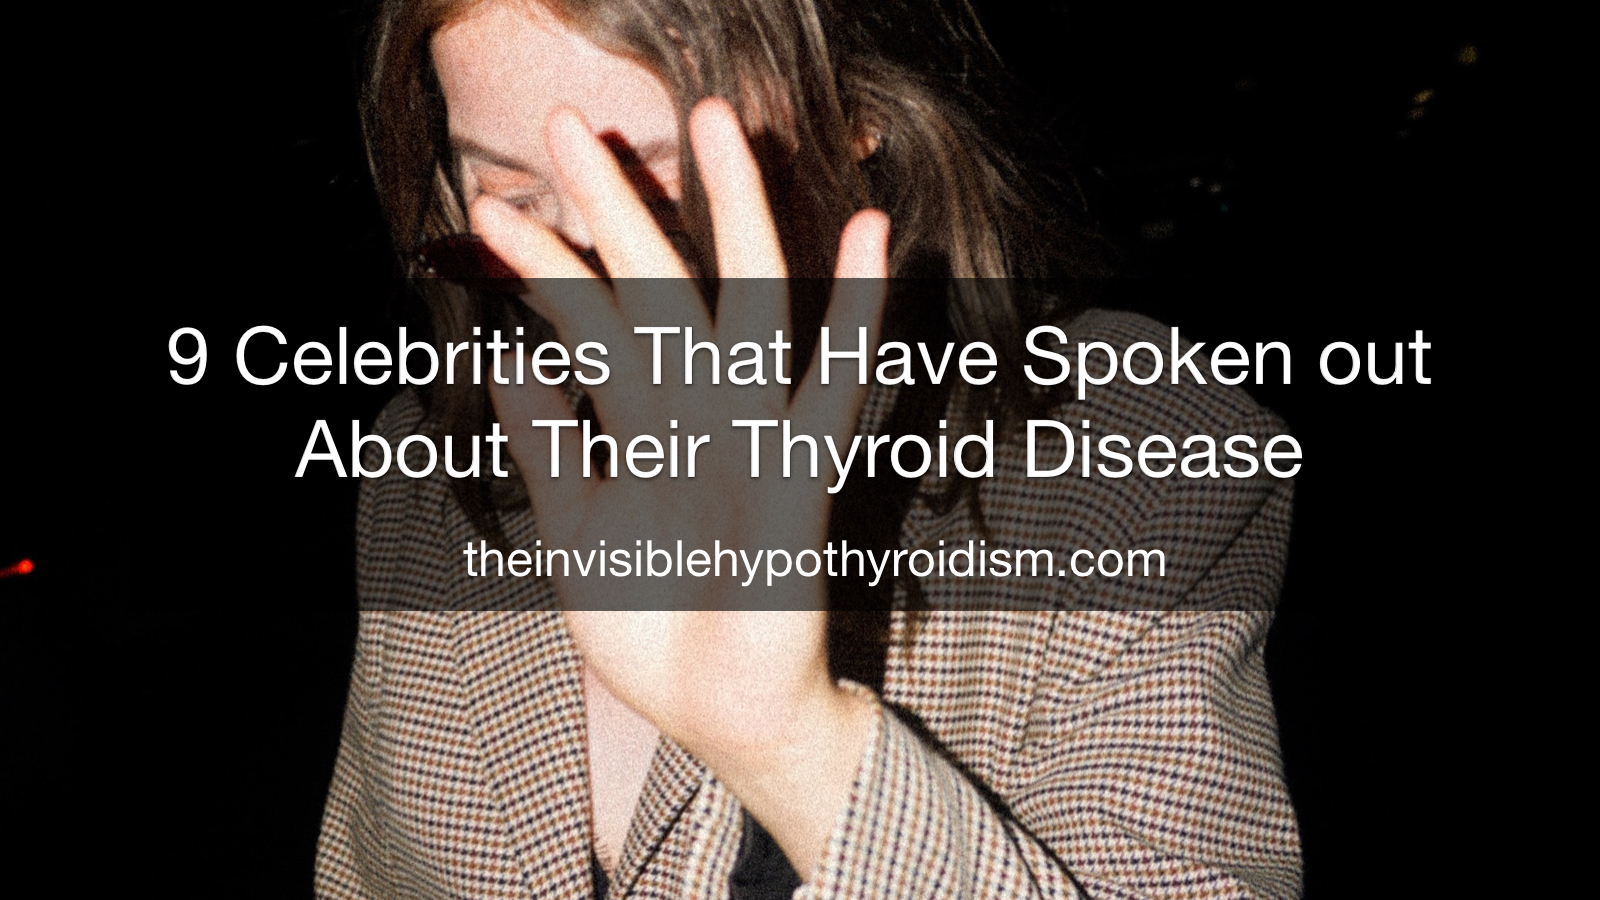 9 Celebrities That Have Spoken out About Their Thyroid Disease